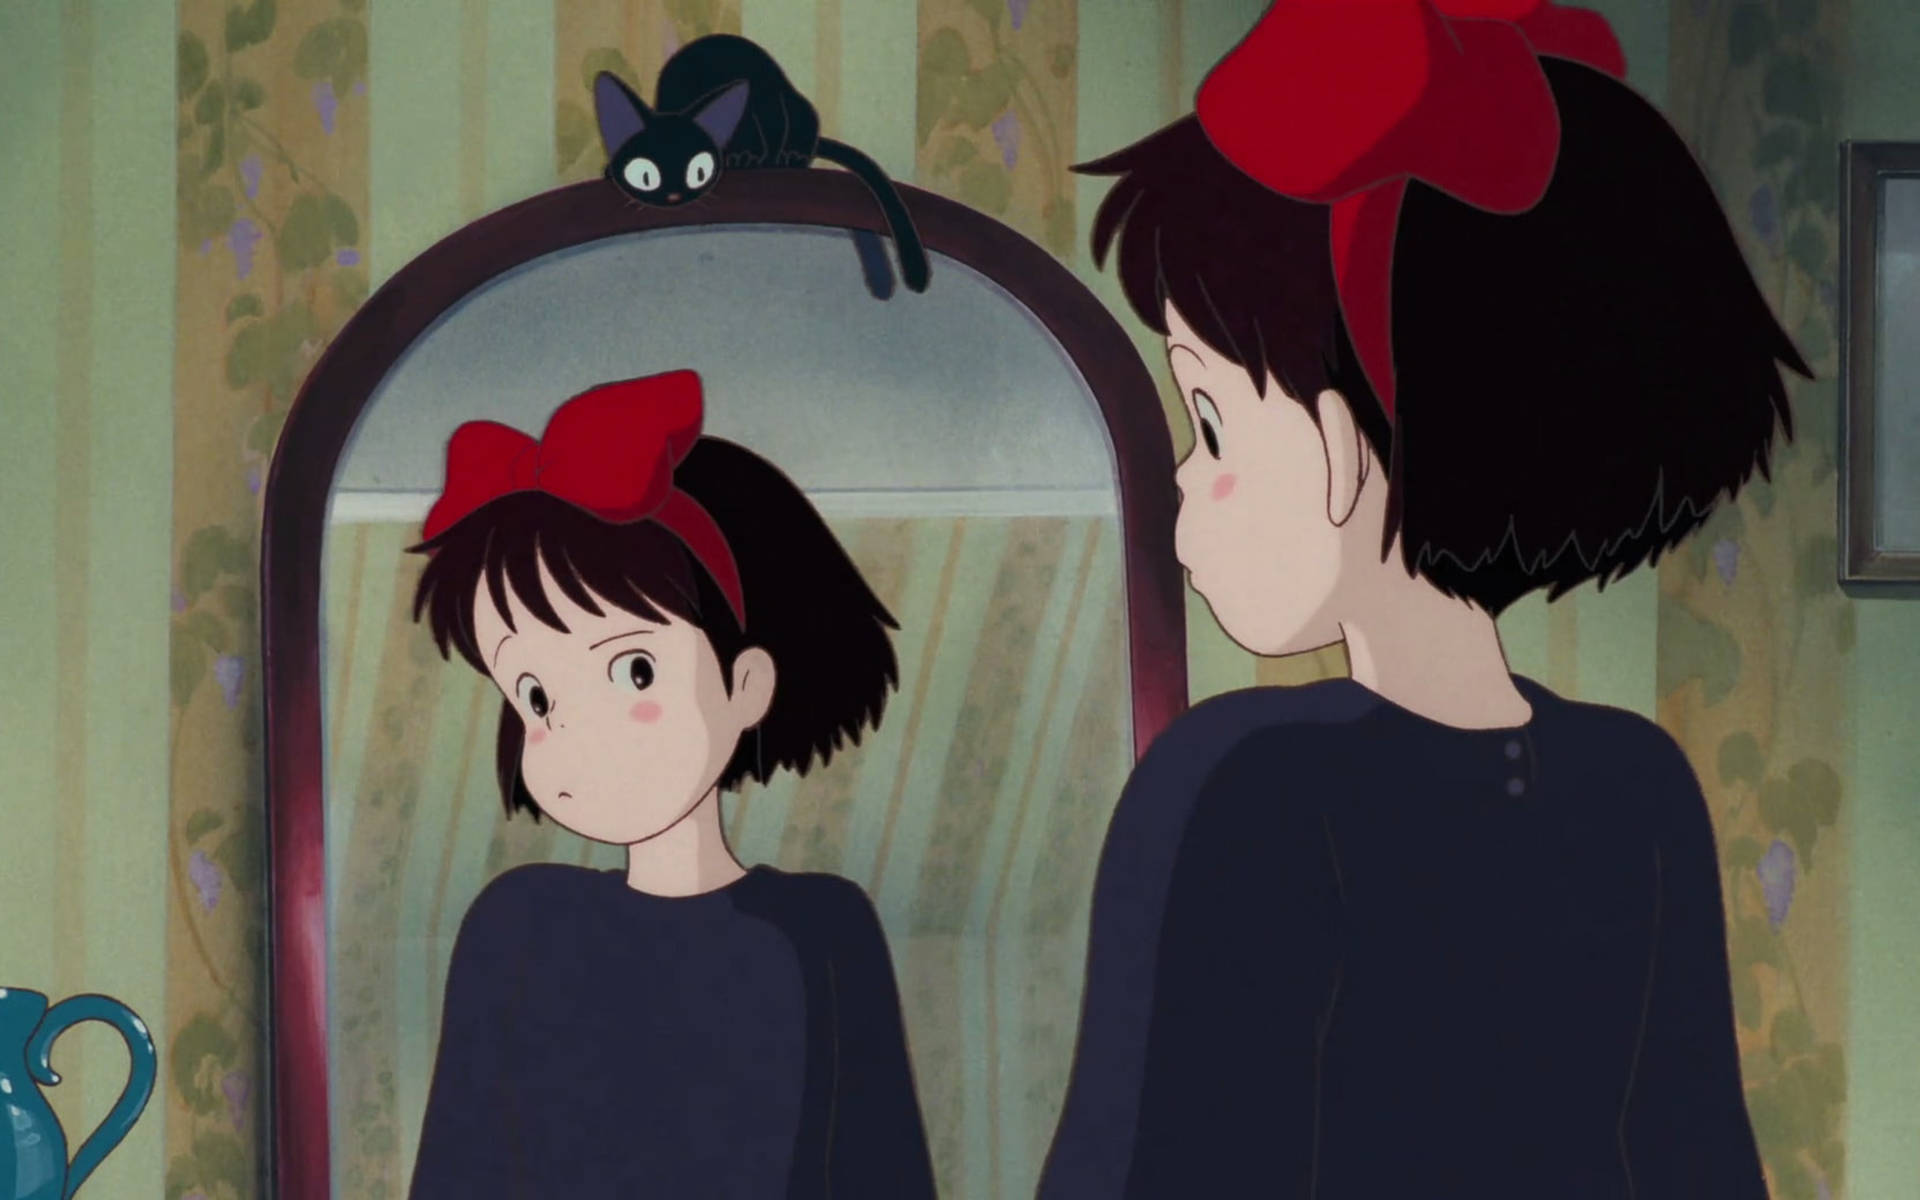 Mirror Mirror From Kikis Delivery Service Wallpaper